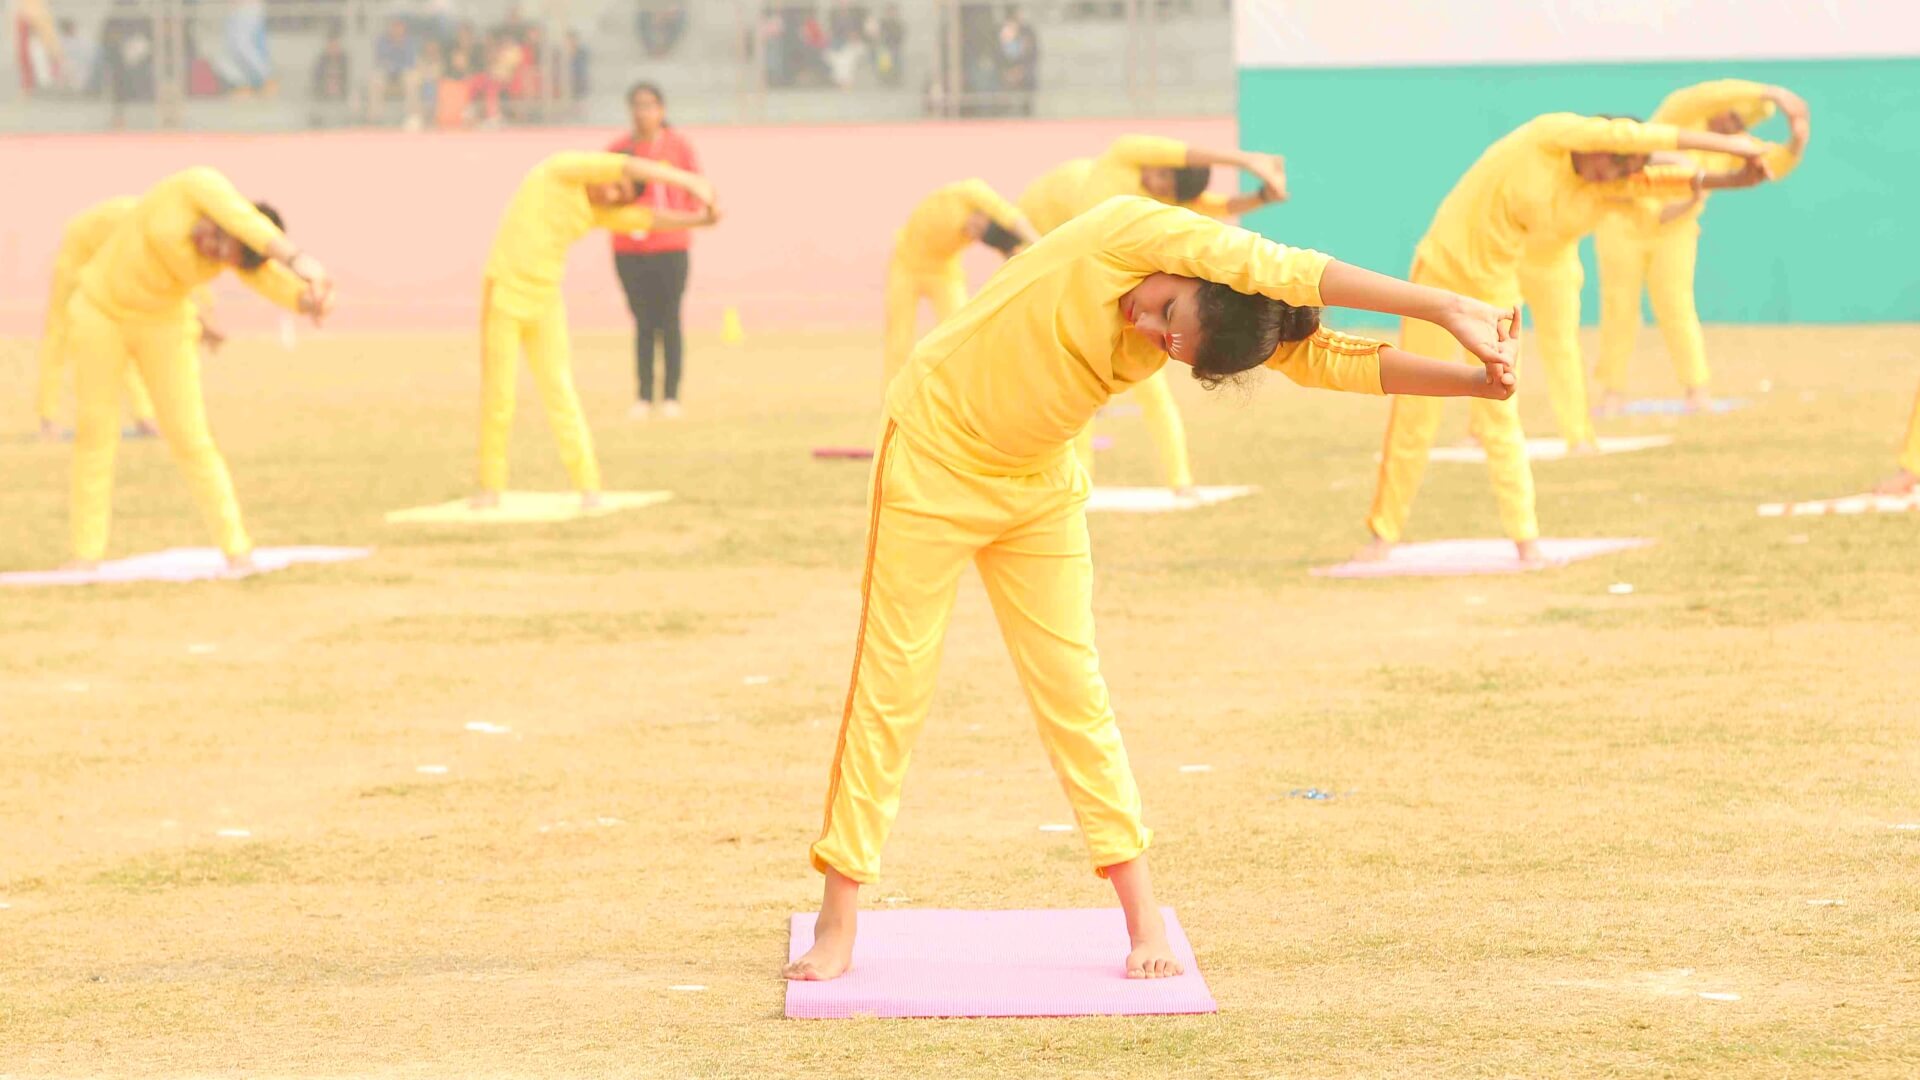 Yoga Performance at Annual Sports Day